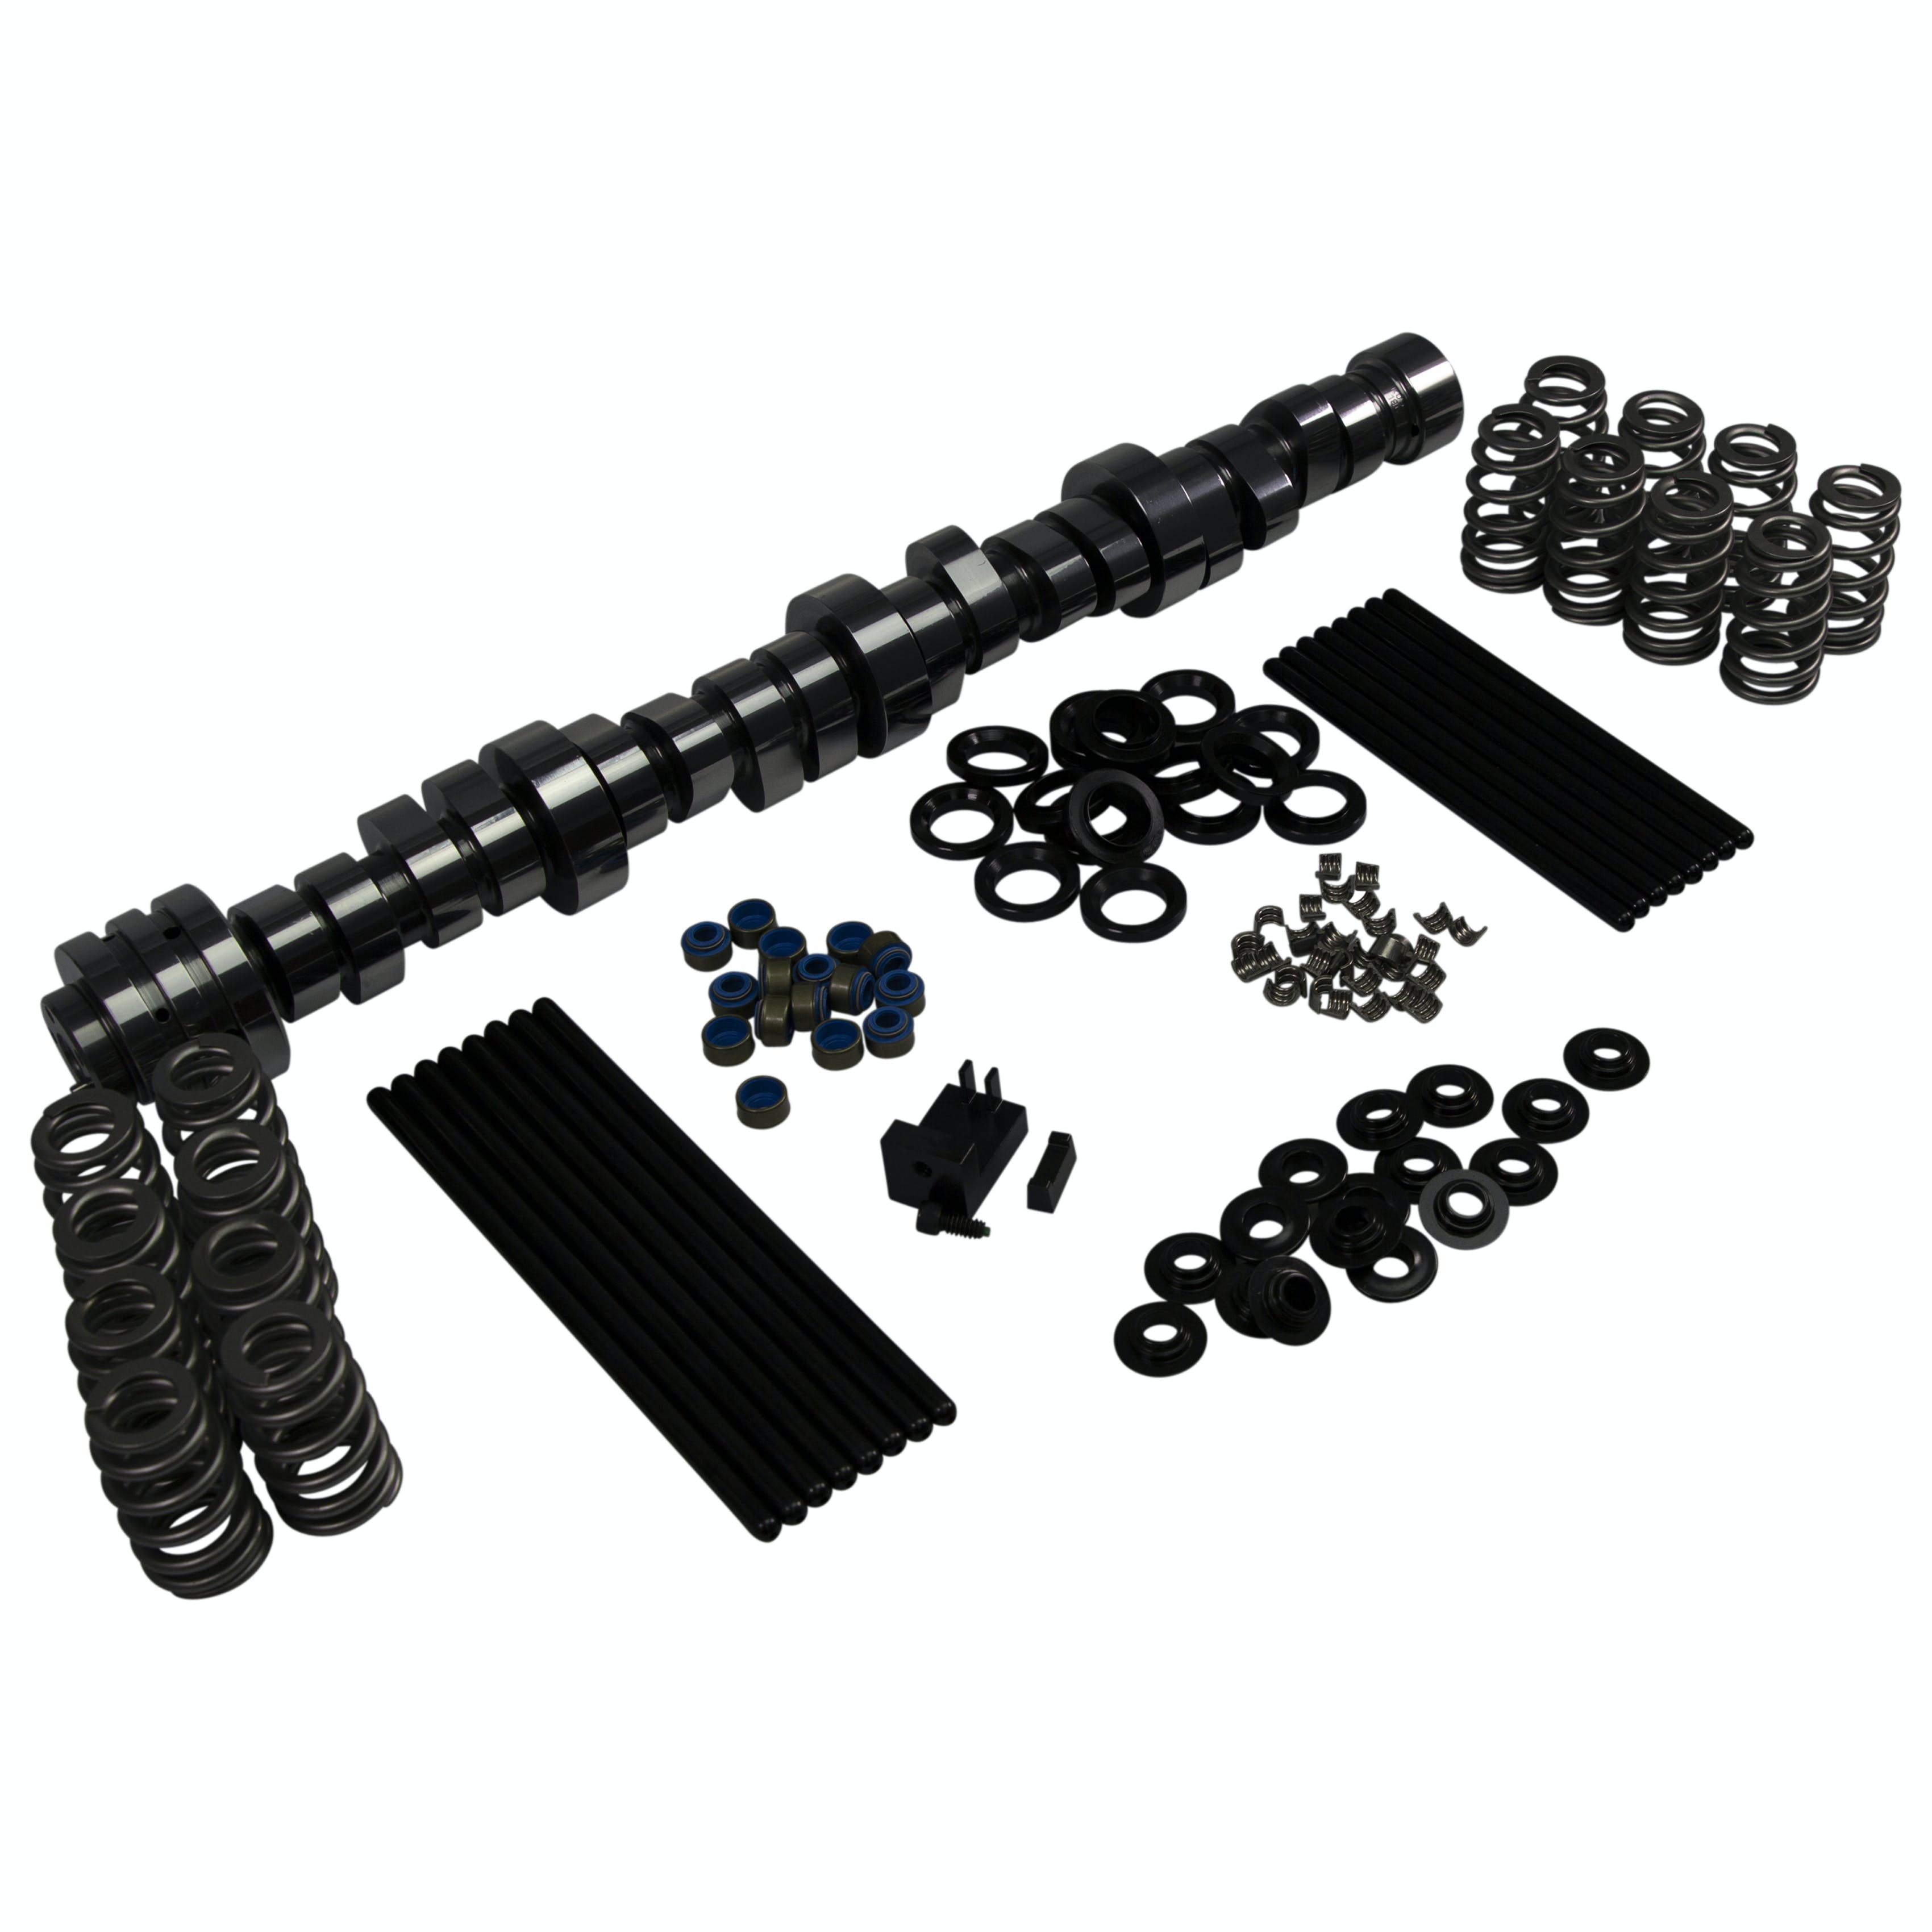 Competition Cams CK201-300-17 Stage 1 HRT No Springs Required MK-Kit for 09+ 5.7L HEMI